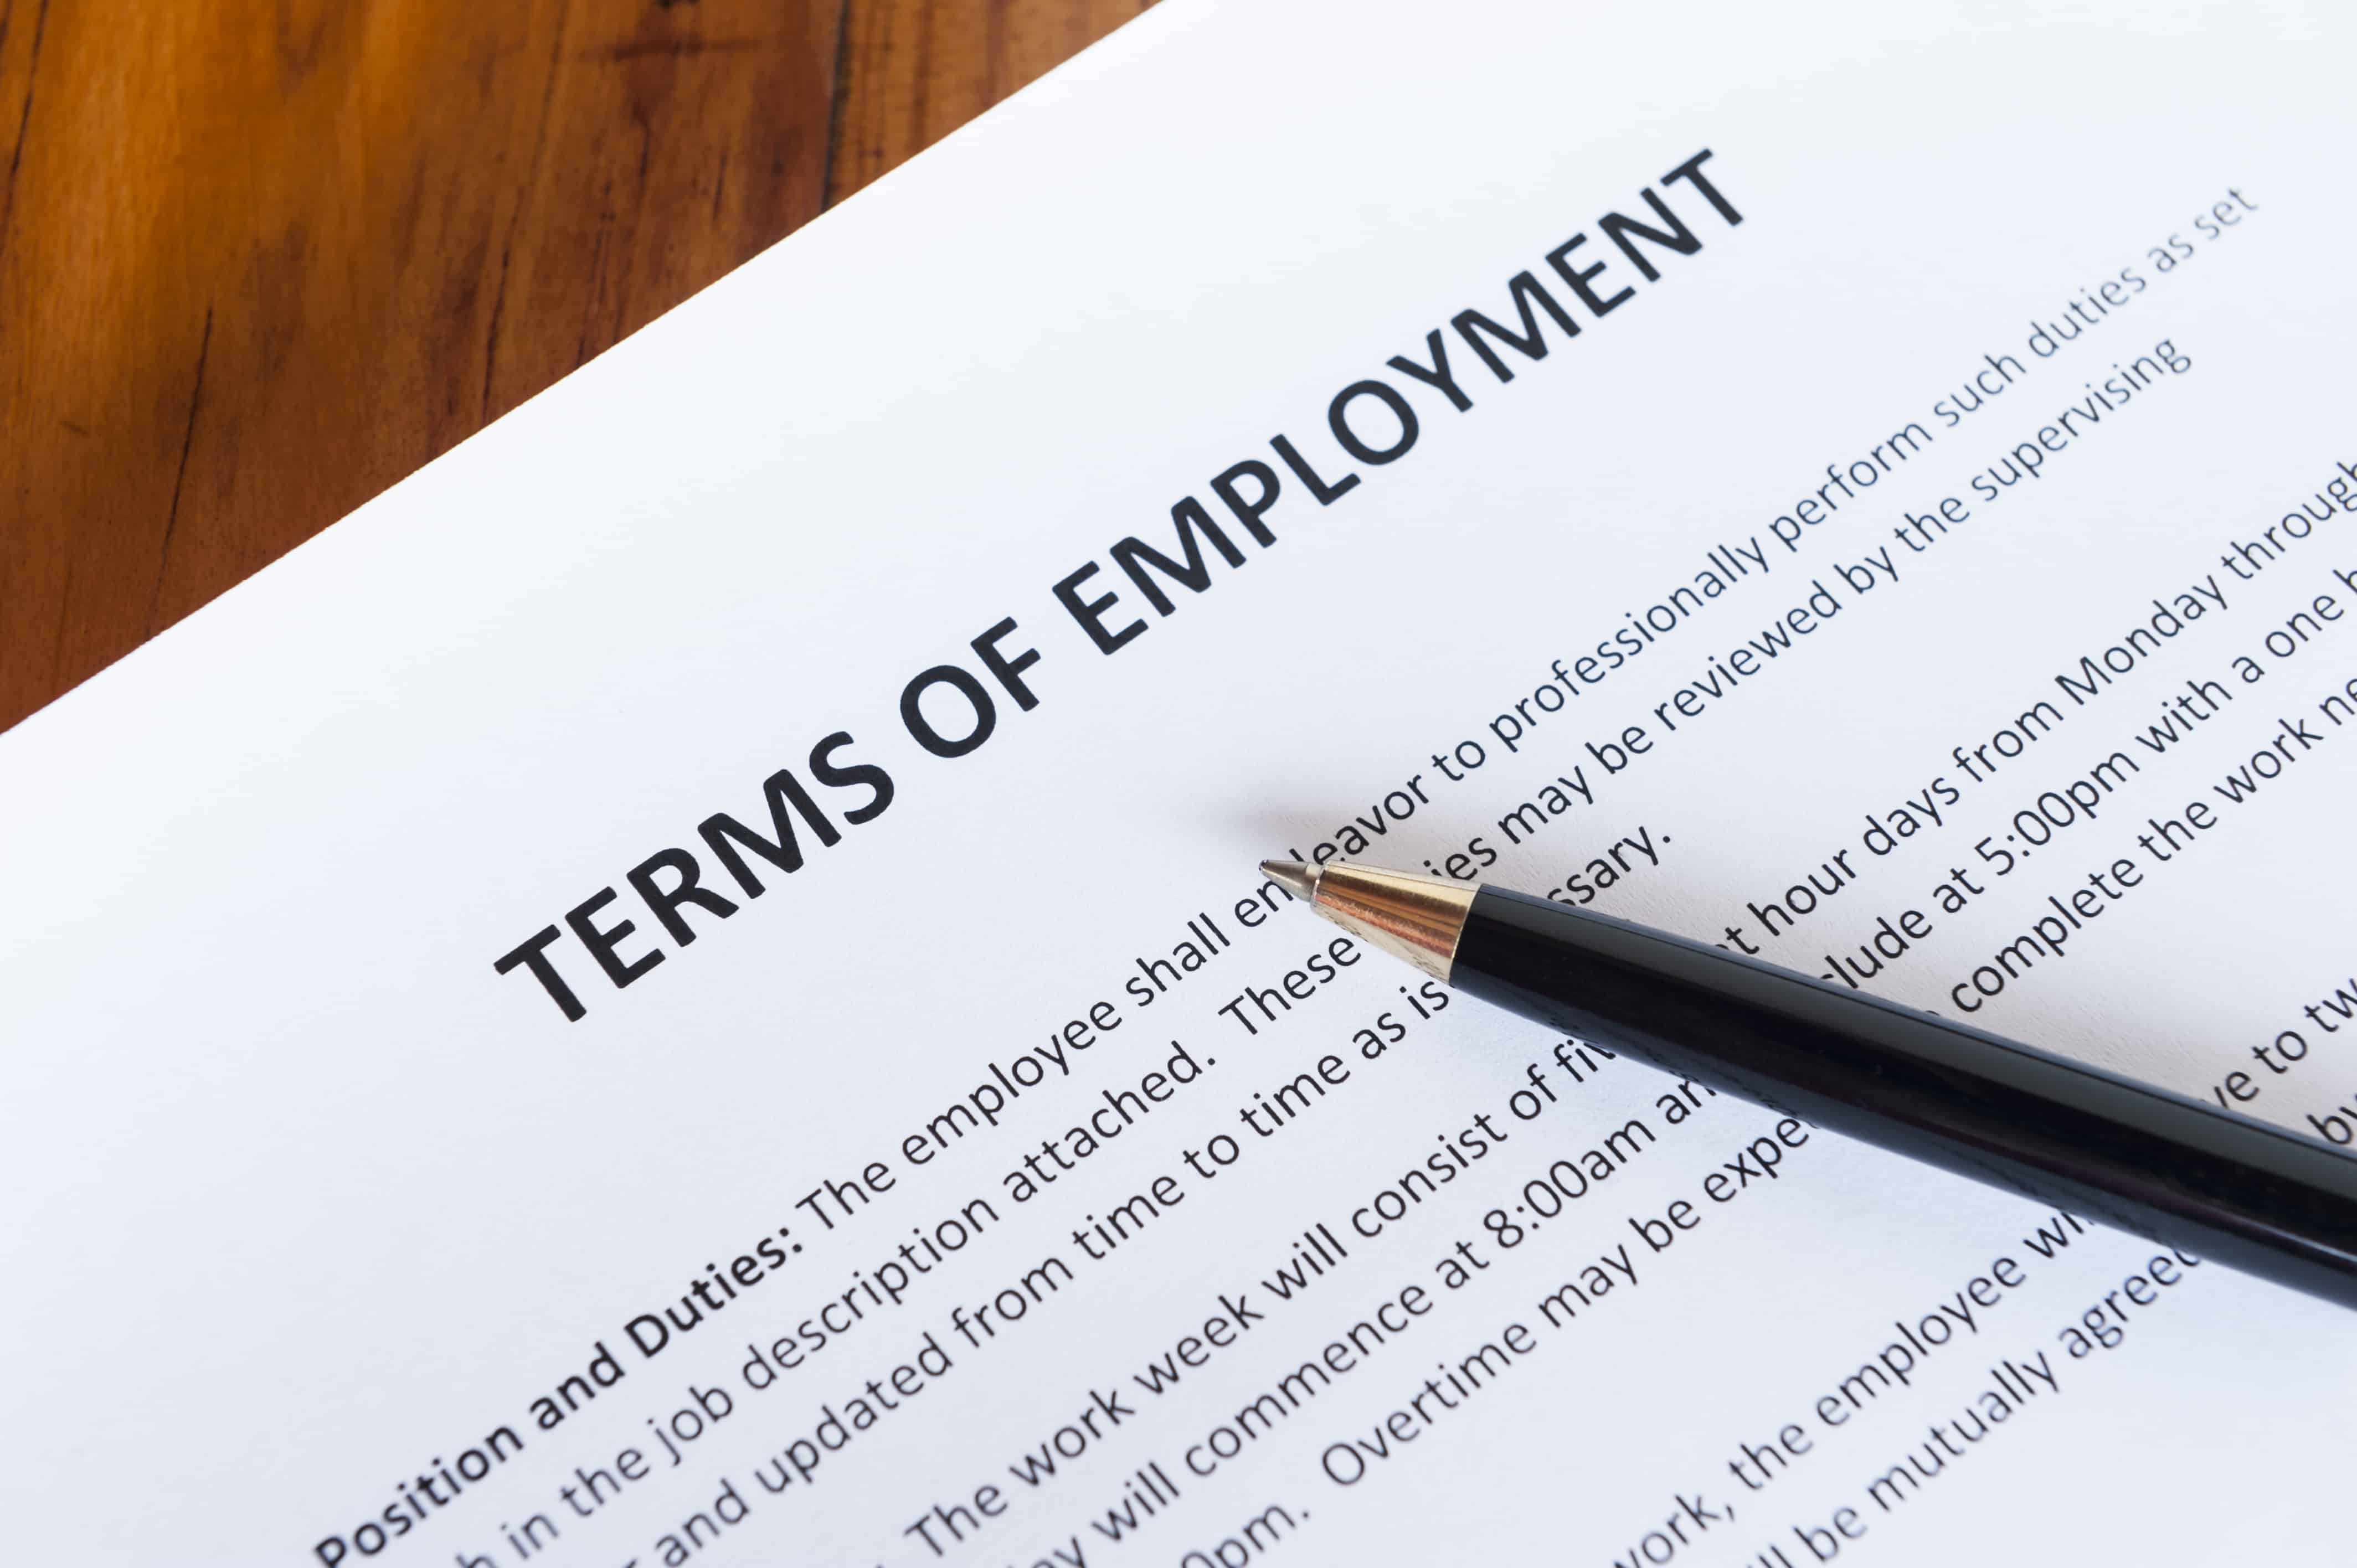 Does My Employment Agreement Protect My Business?